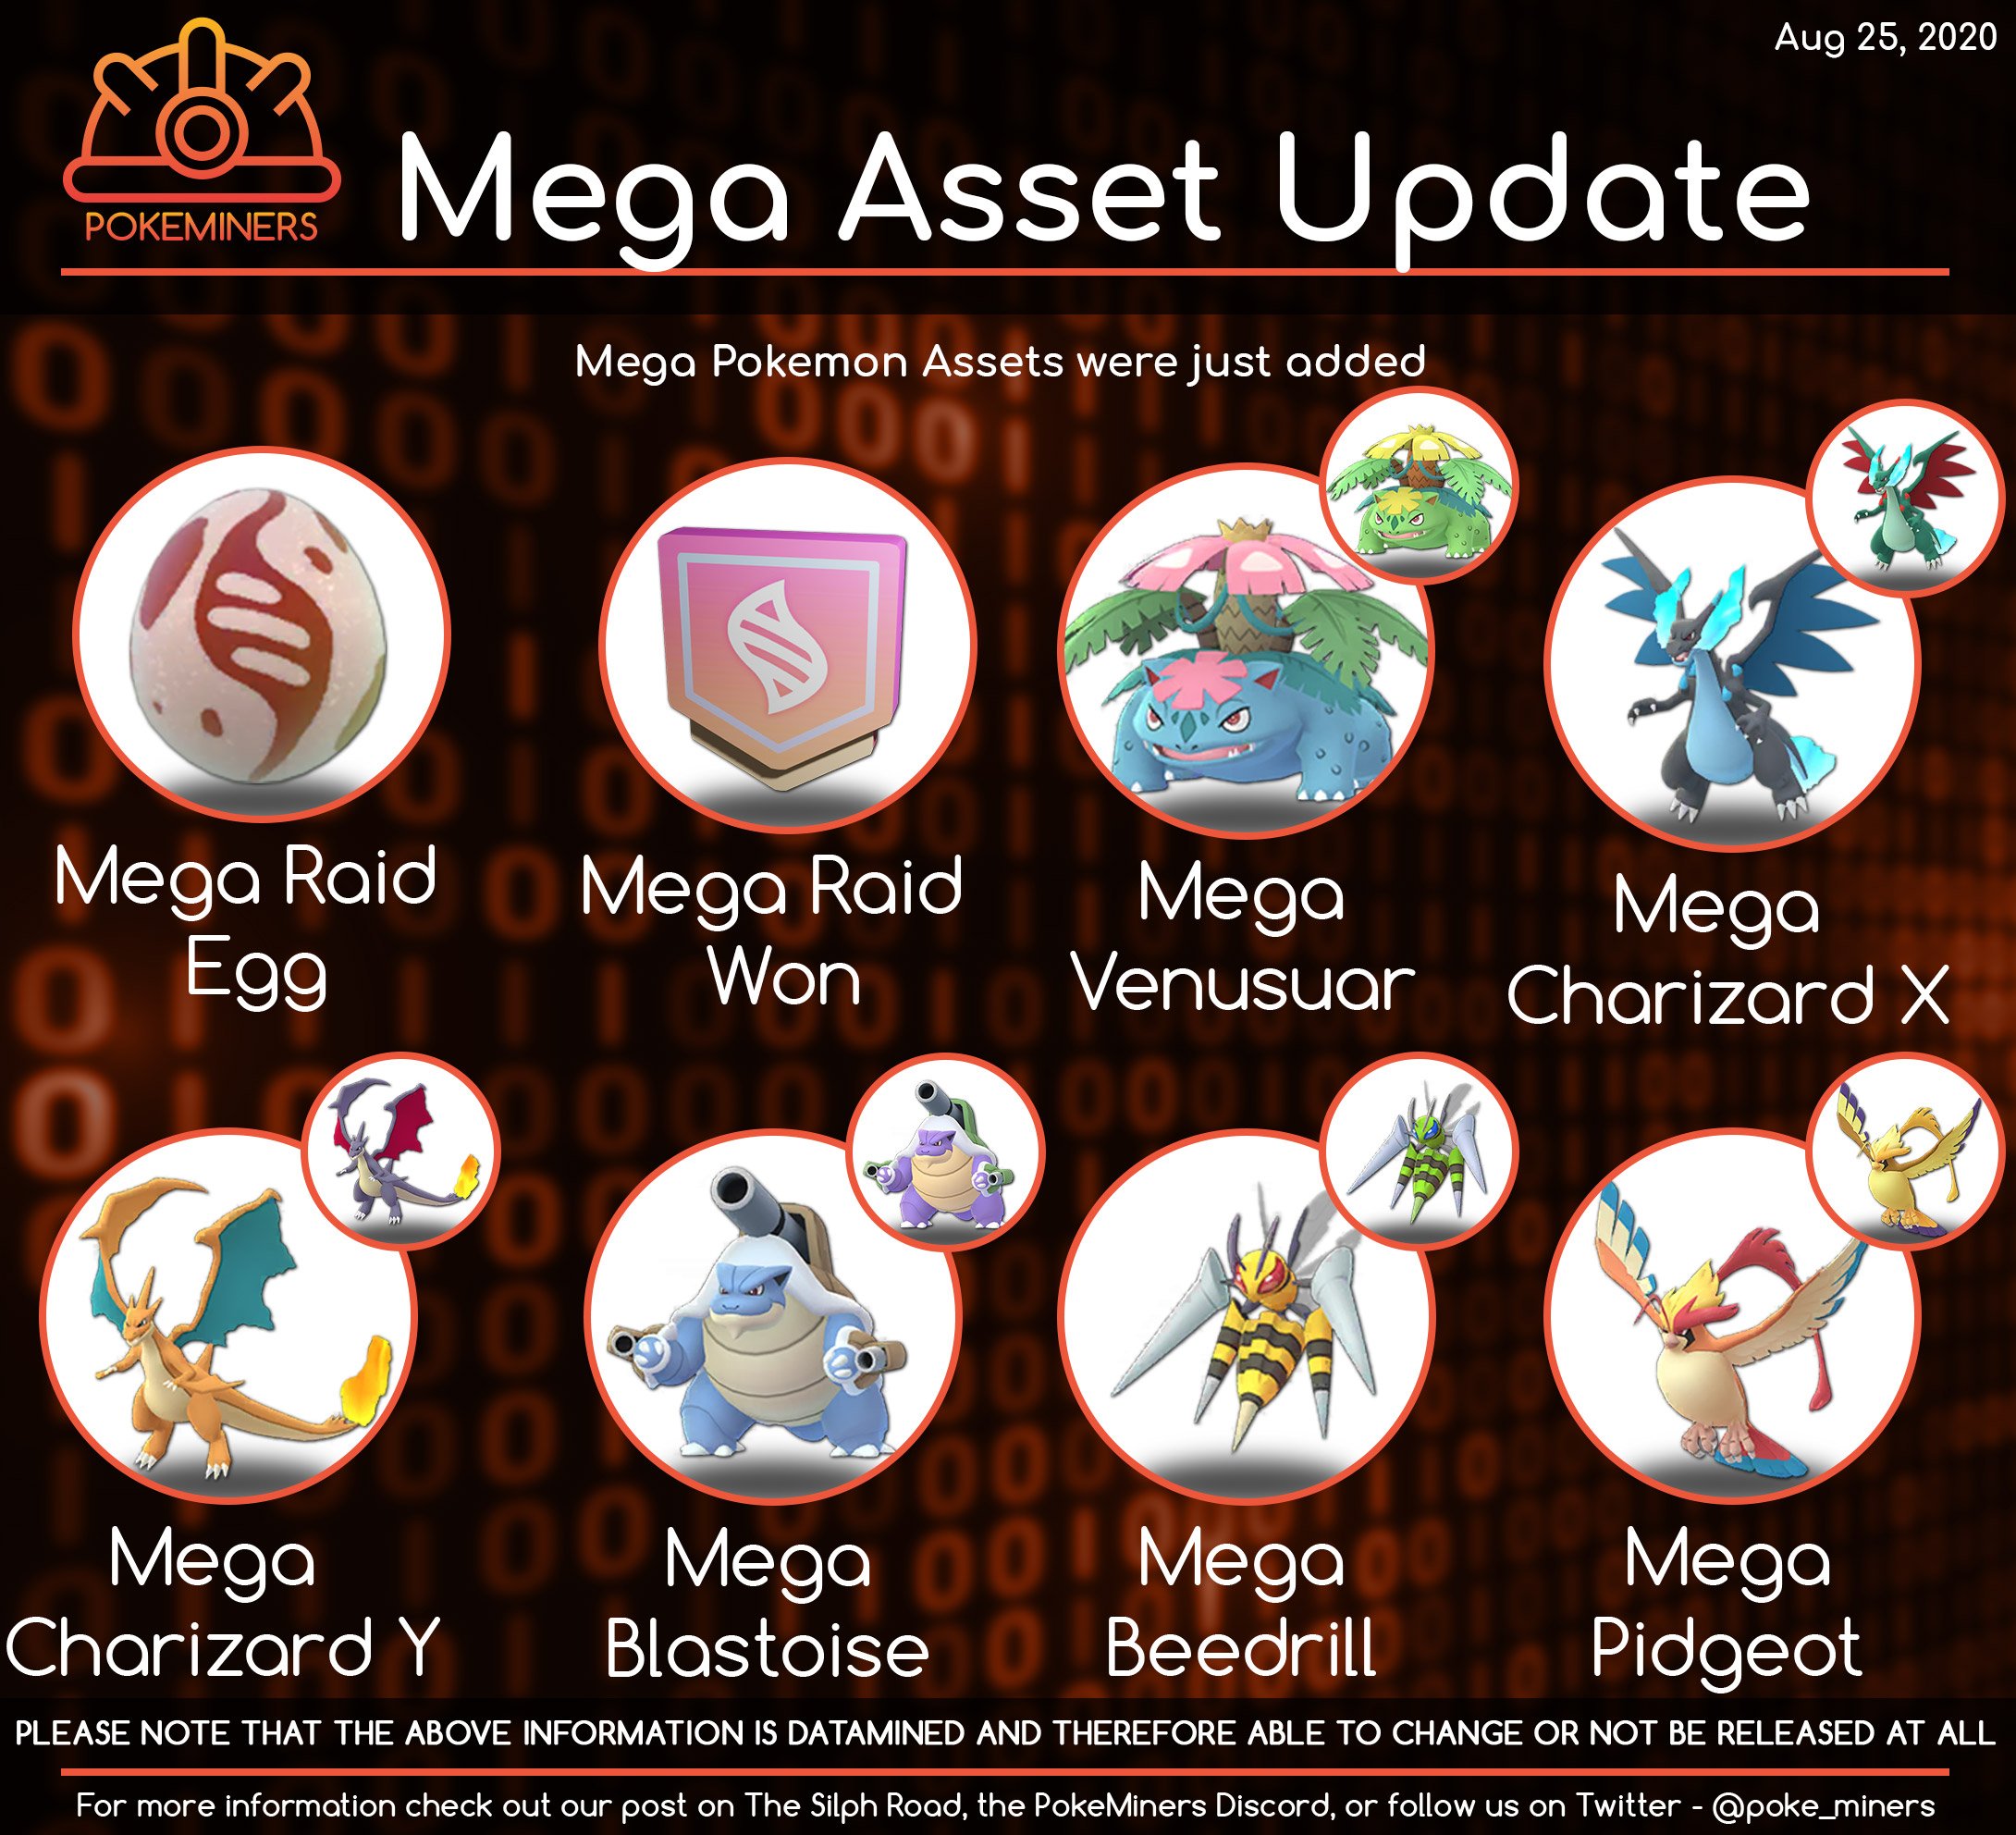 Icons for Mega Pokémon and Mega Badges discovered by data miners